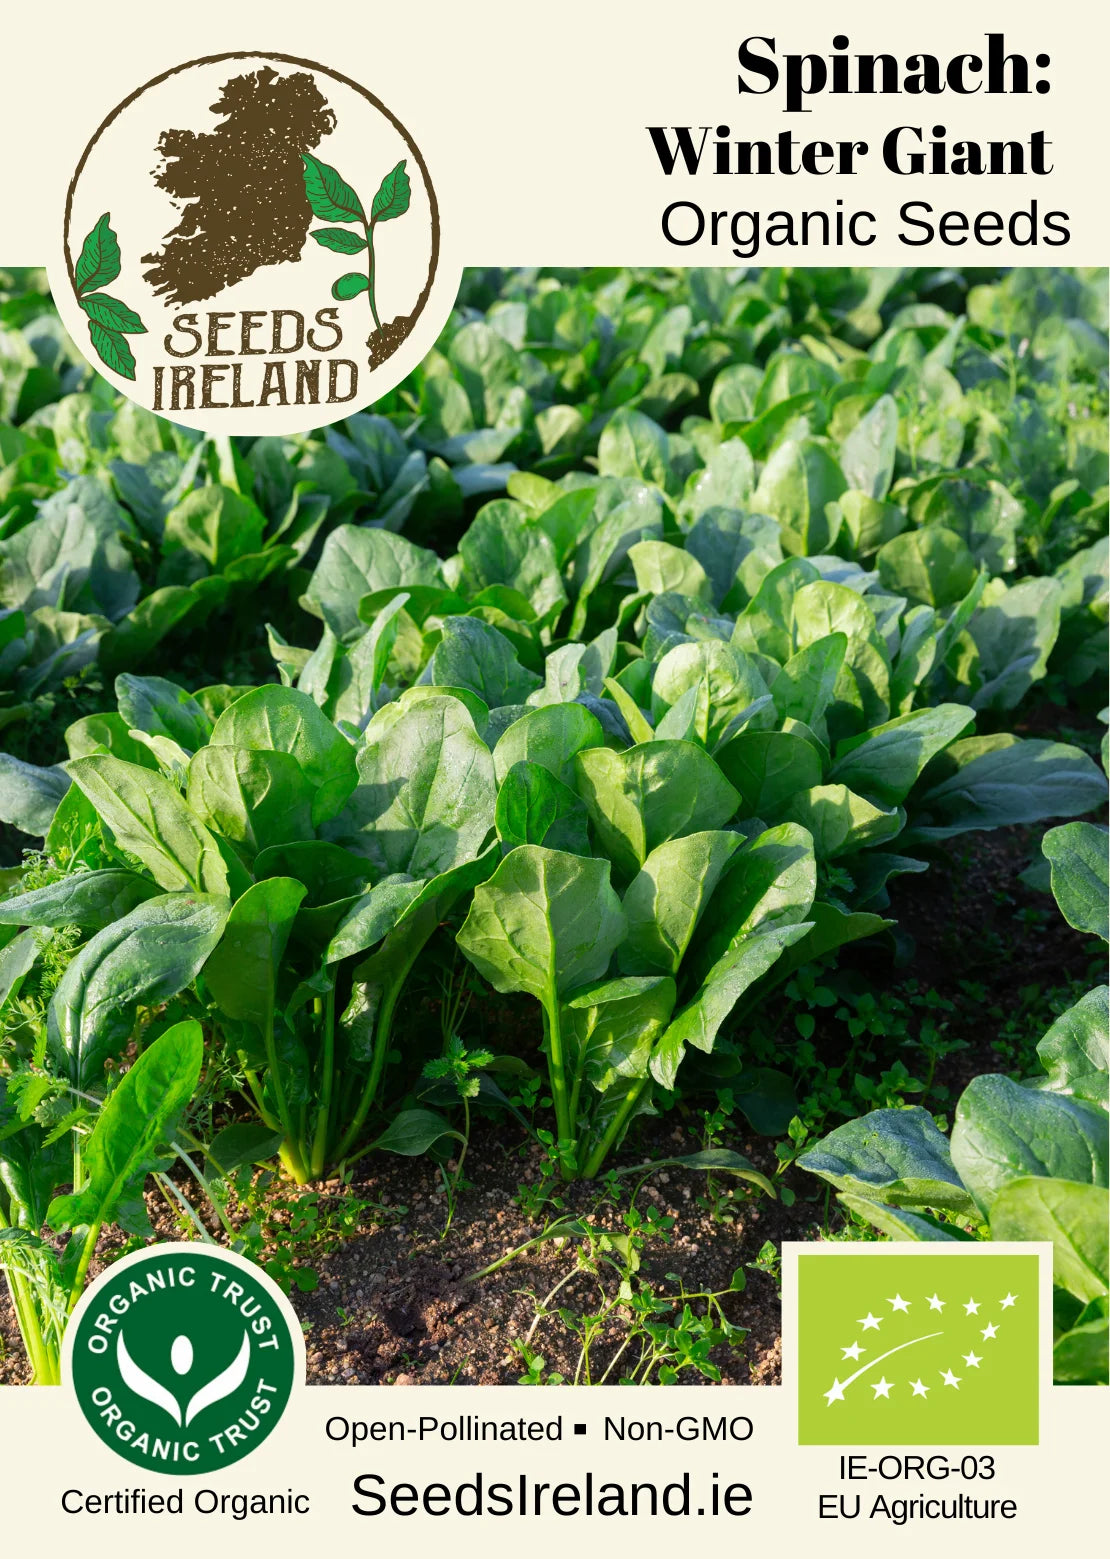 Spinach: Winter Giant Organic Seed